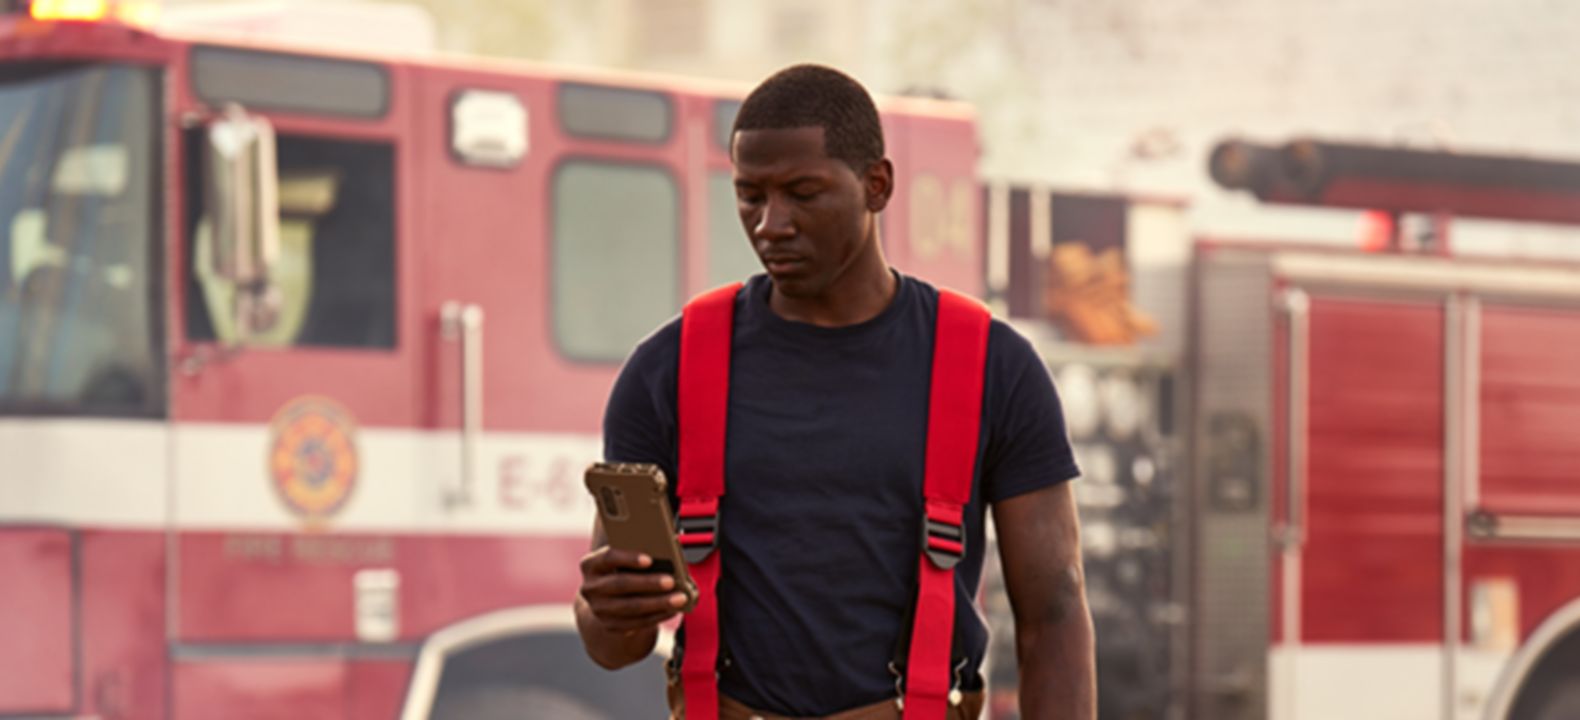 fireperson using device in front of firetruck